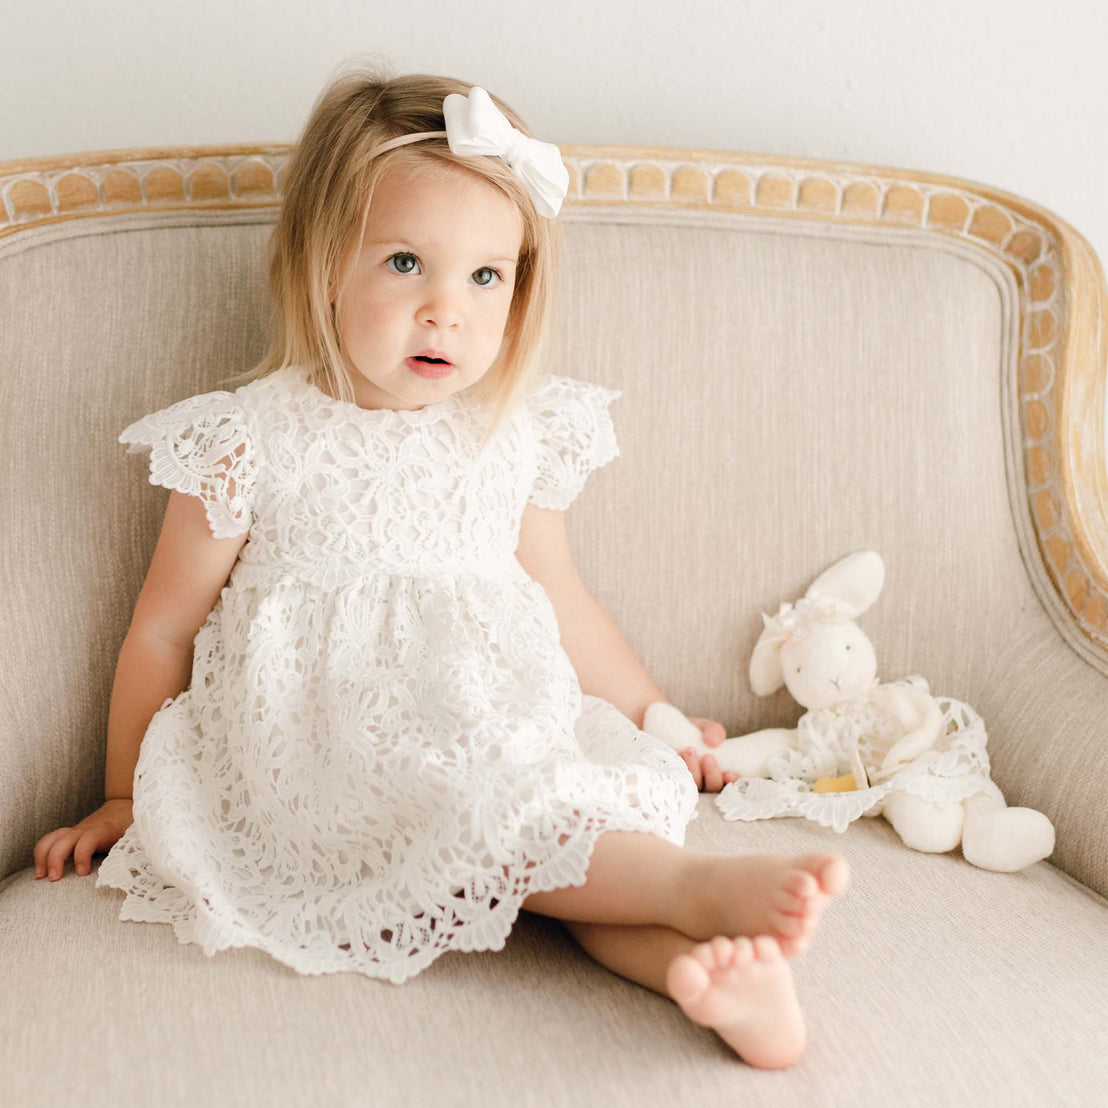 Baby girl wearing the Lola Dress and Lola velvet headband. Dress is made with cotton lining in light ivory featuring an all-over lace overlay. She is holding a Lola Silly Bunny Buddy pacifier holder. 